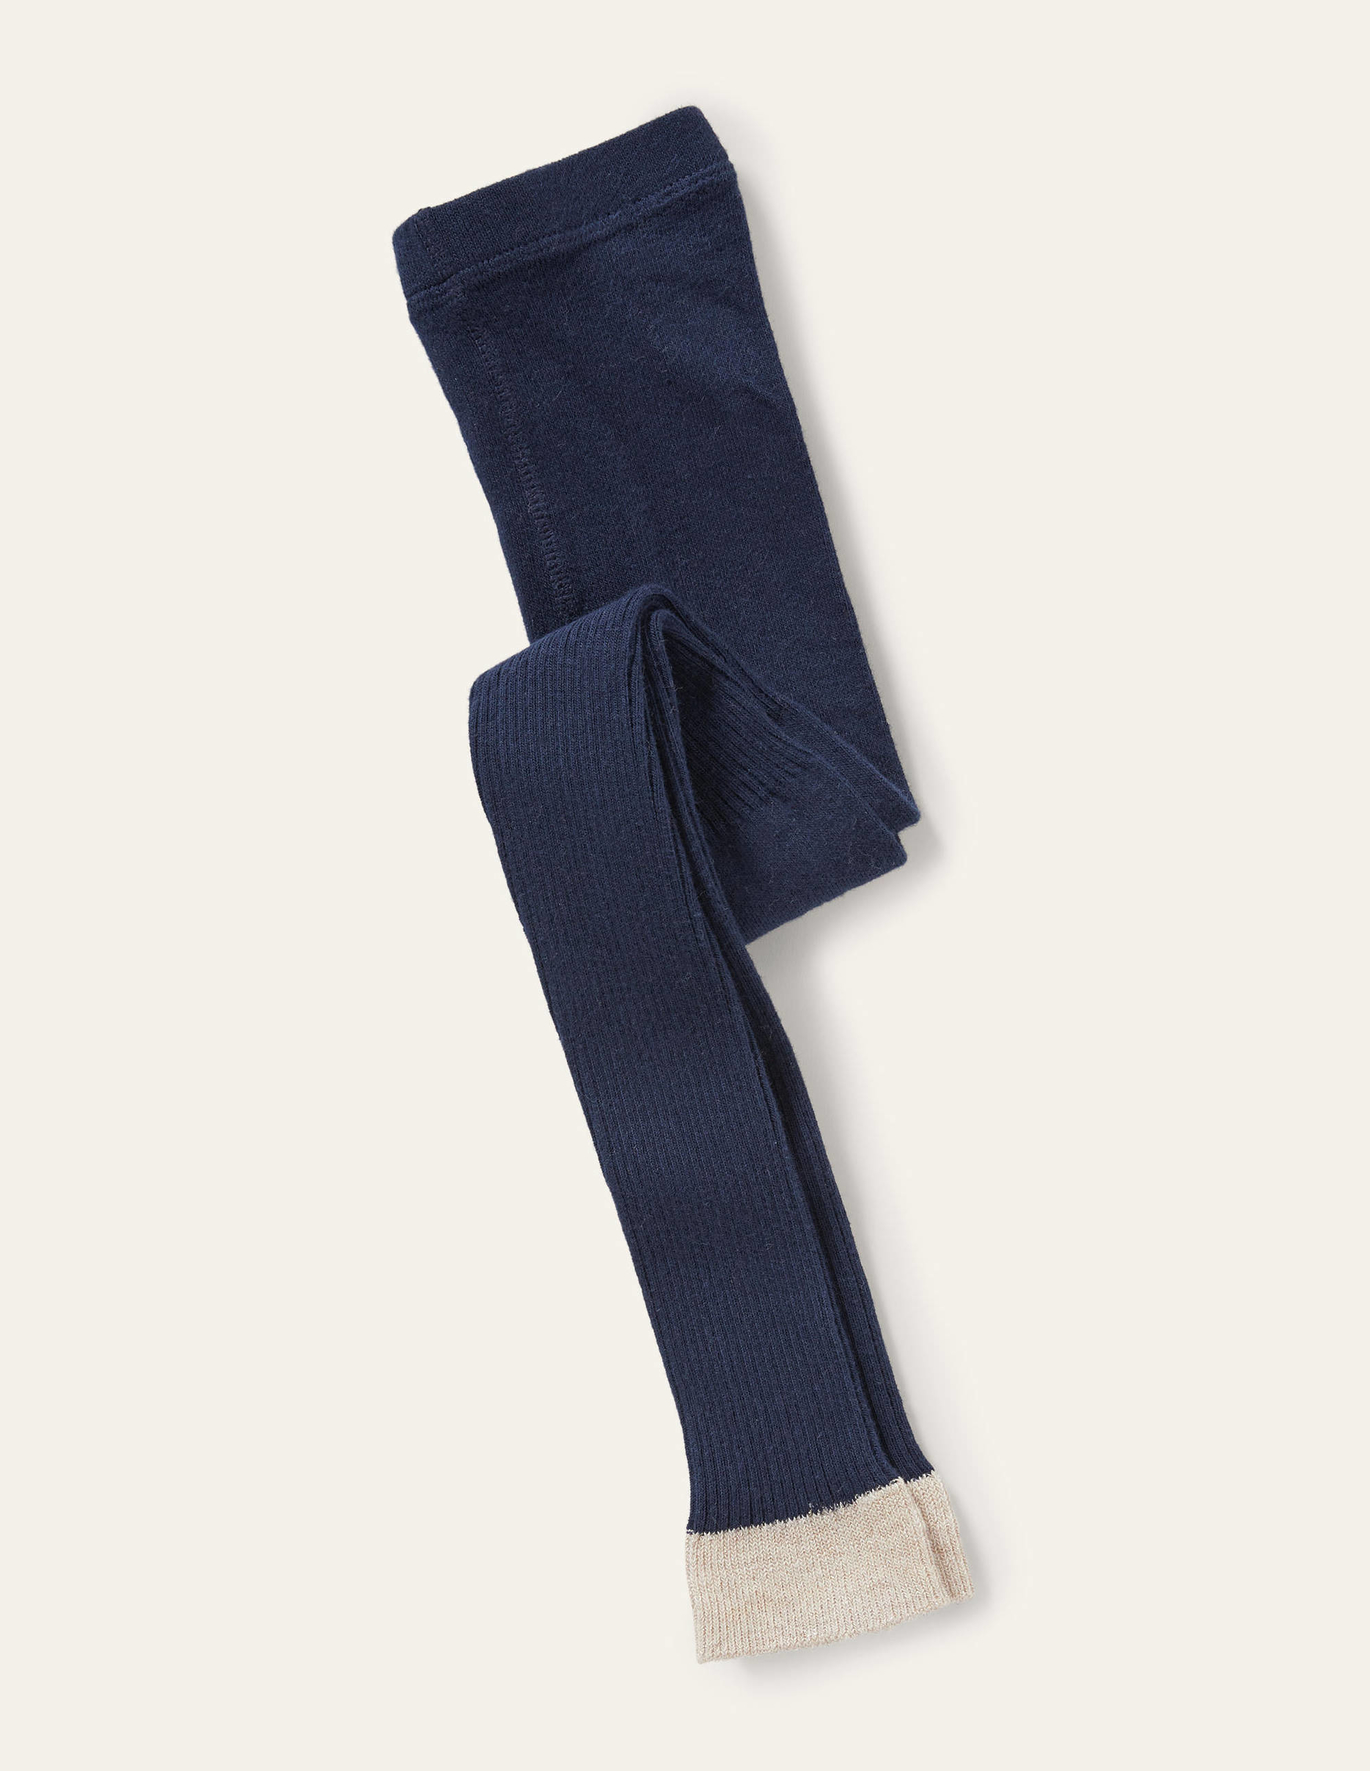 Boden Ribbed Footless Tights - Navy Blue